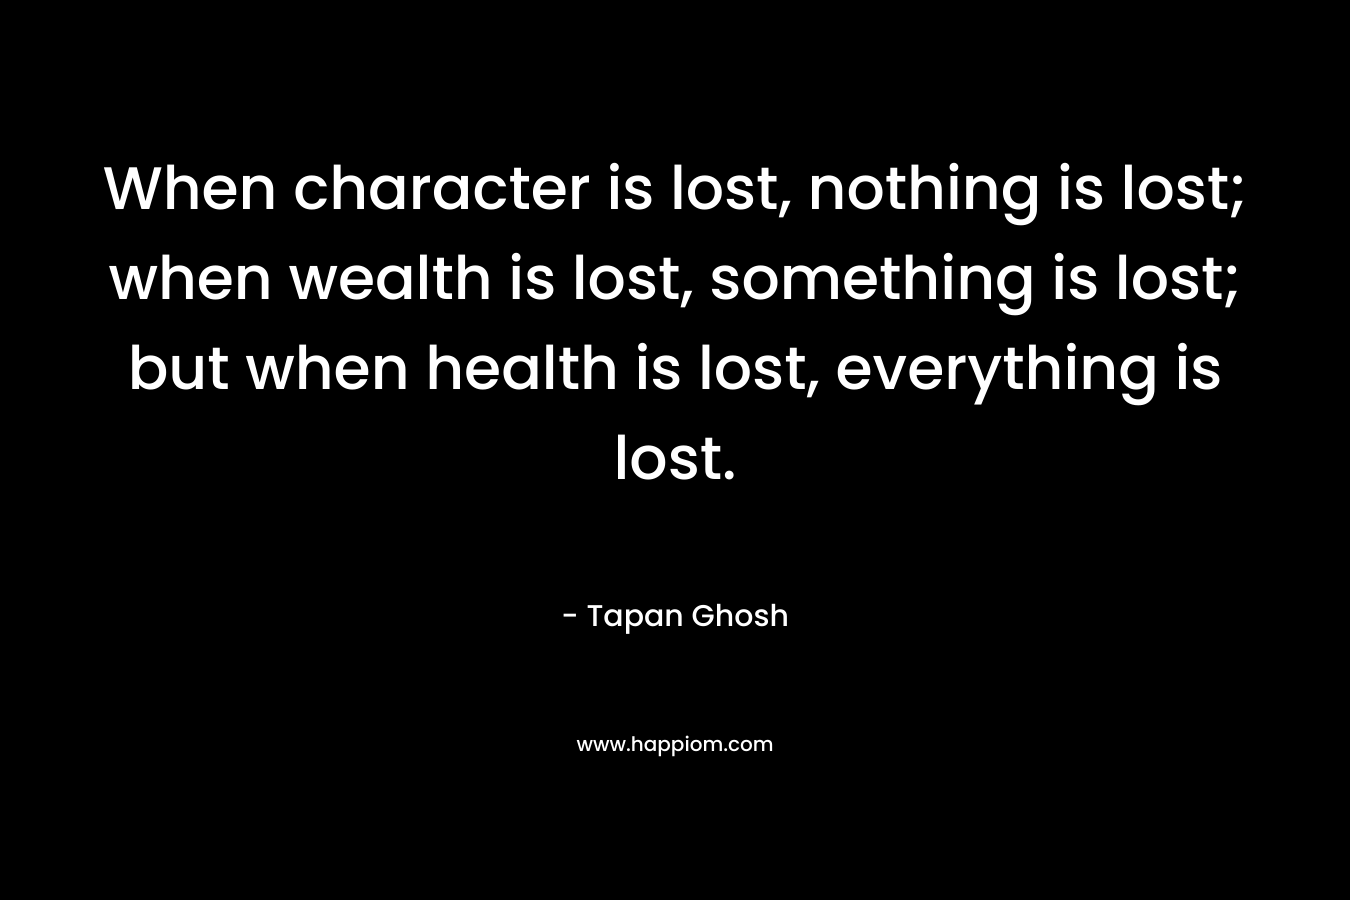 When character is lost, nothing is lost; when wealth is lost, something is lost; but when health is lost, everything is lost. – Tapan Ghosh